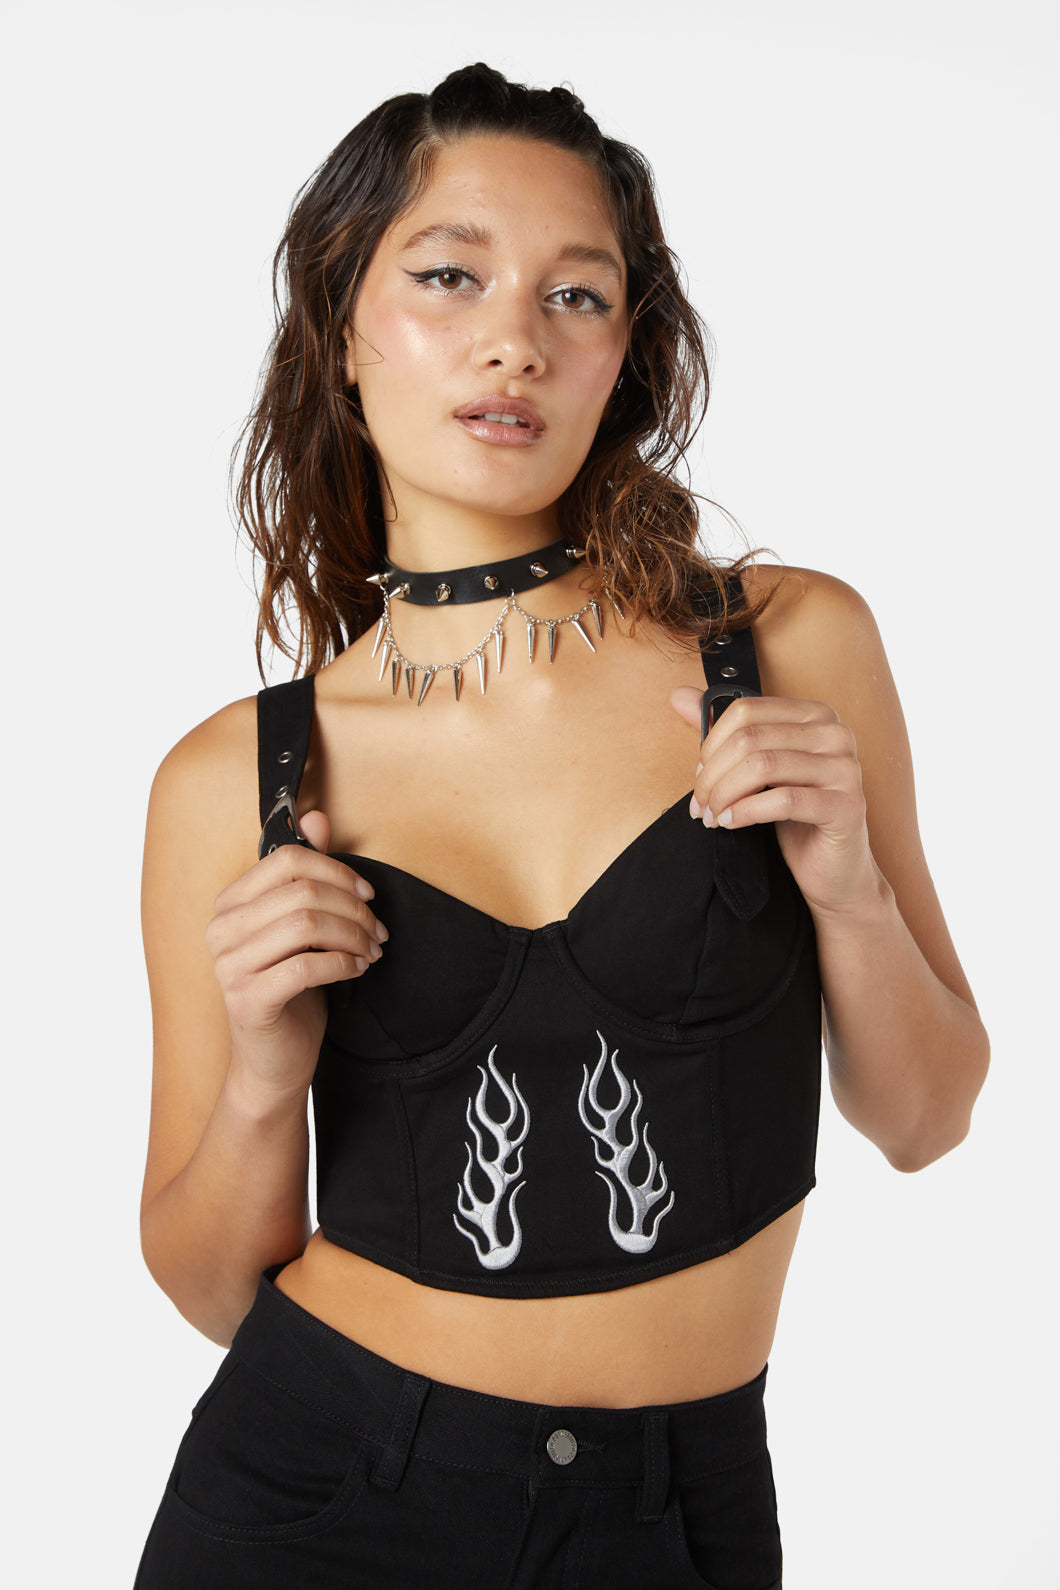 Black corset styled top with flames - Clothing